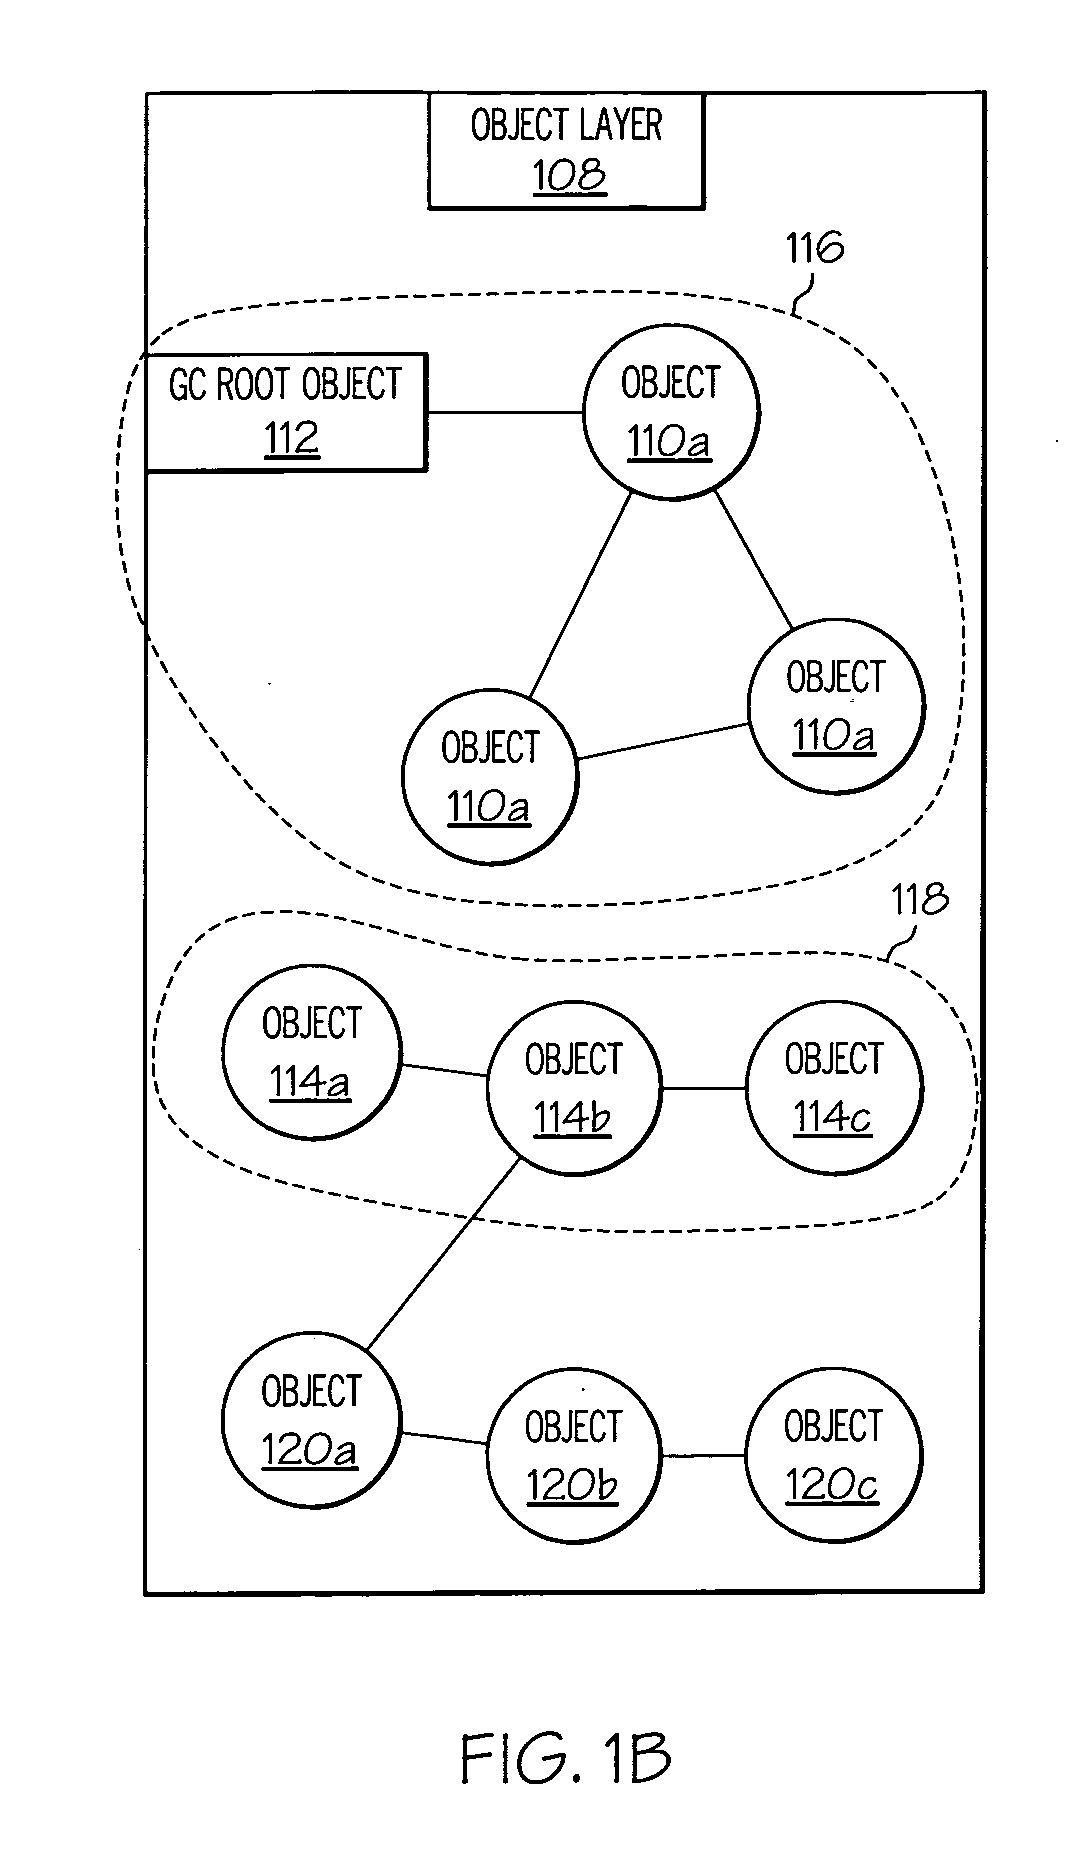 Attributing memory usage by individual software components